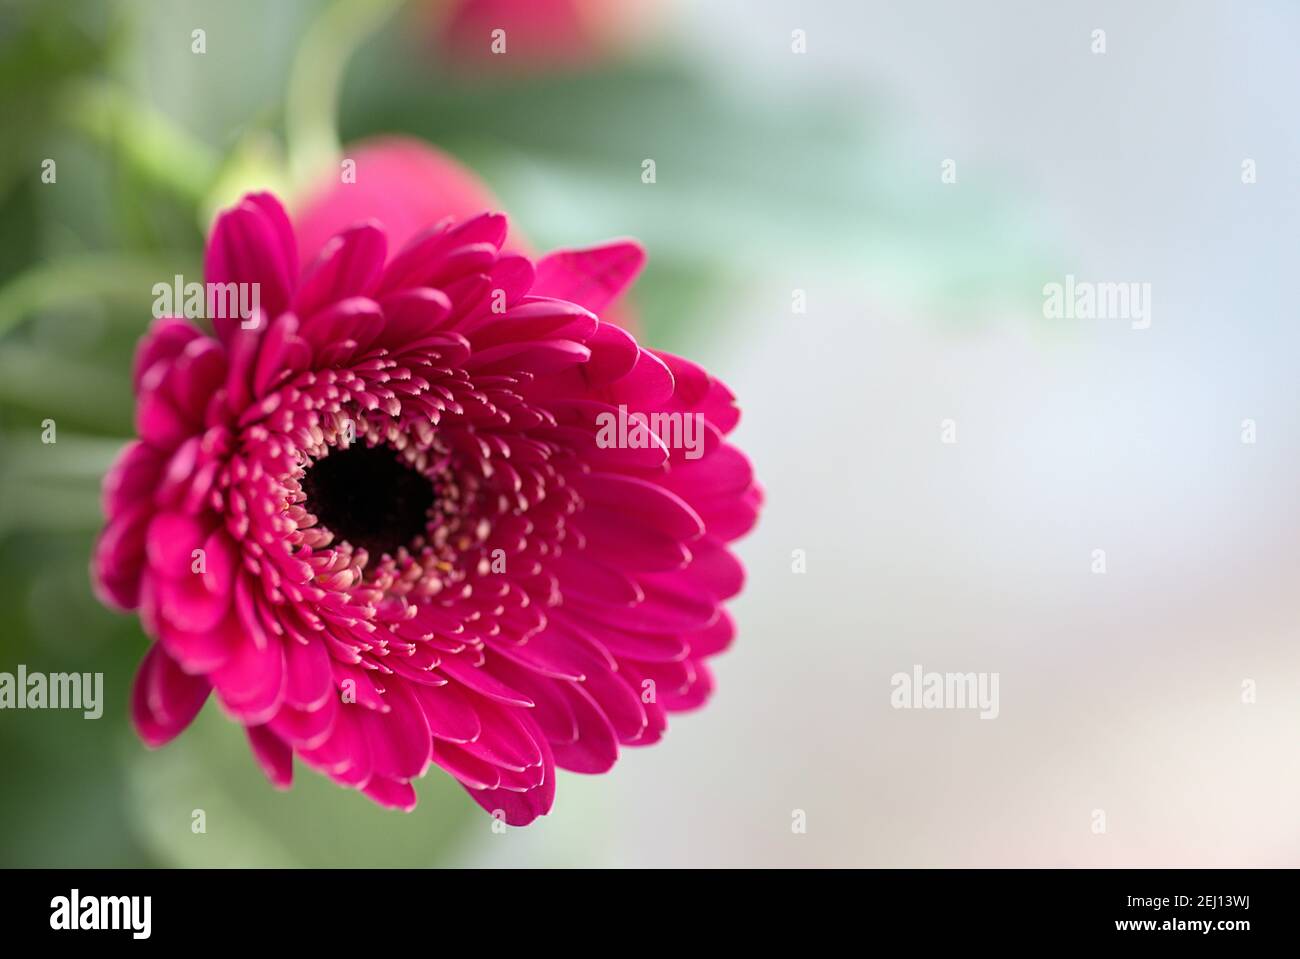 Violet flower of Gerbera Daisy with blurry creamy background Stock Photo